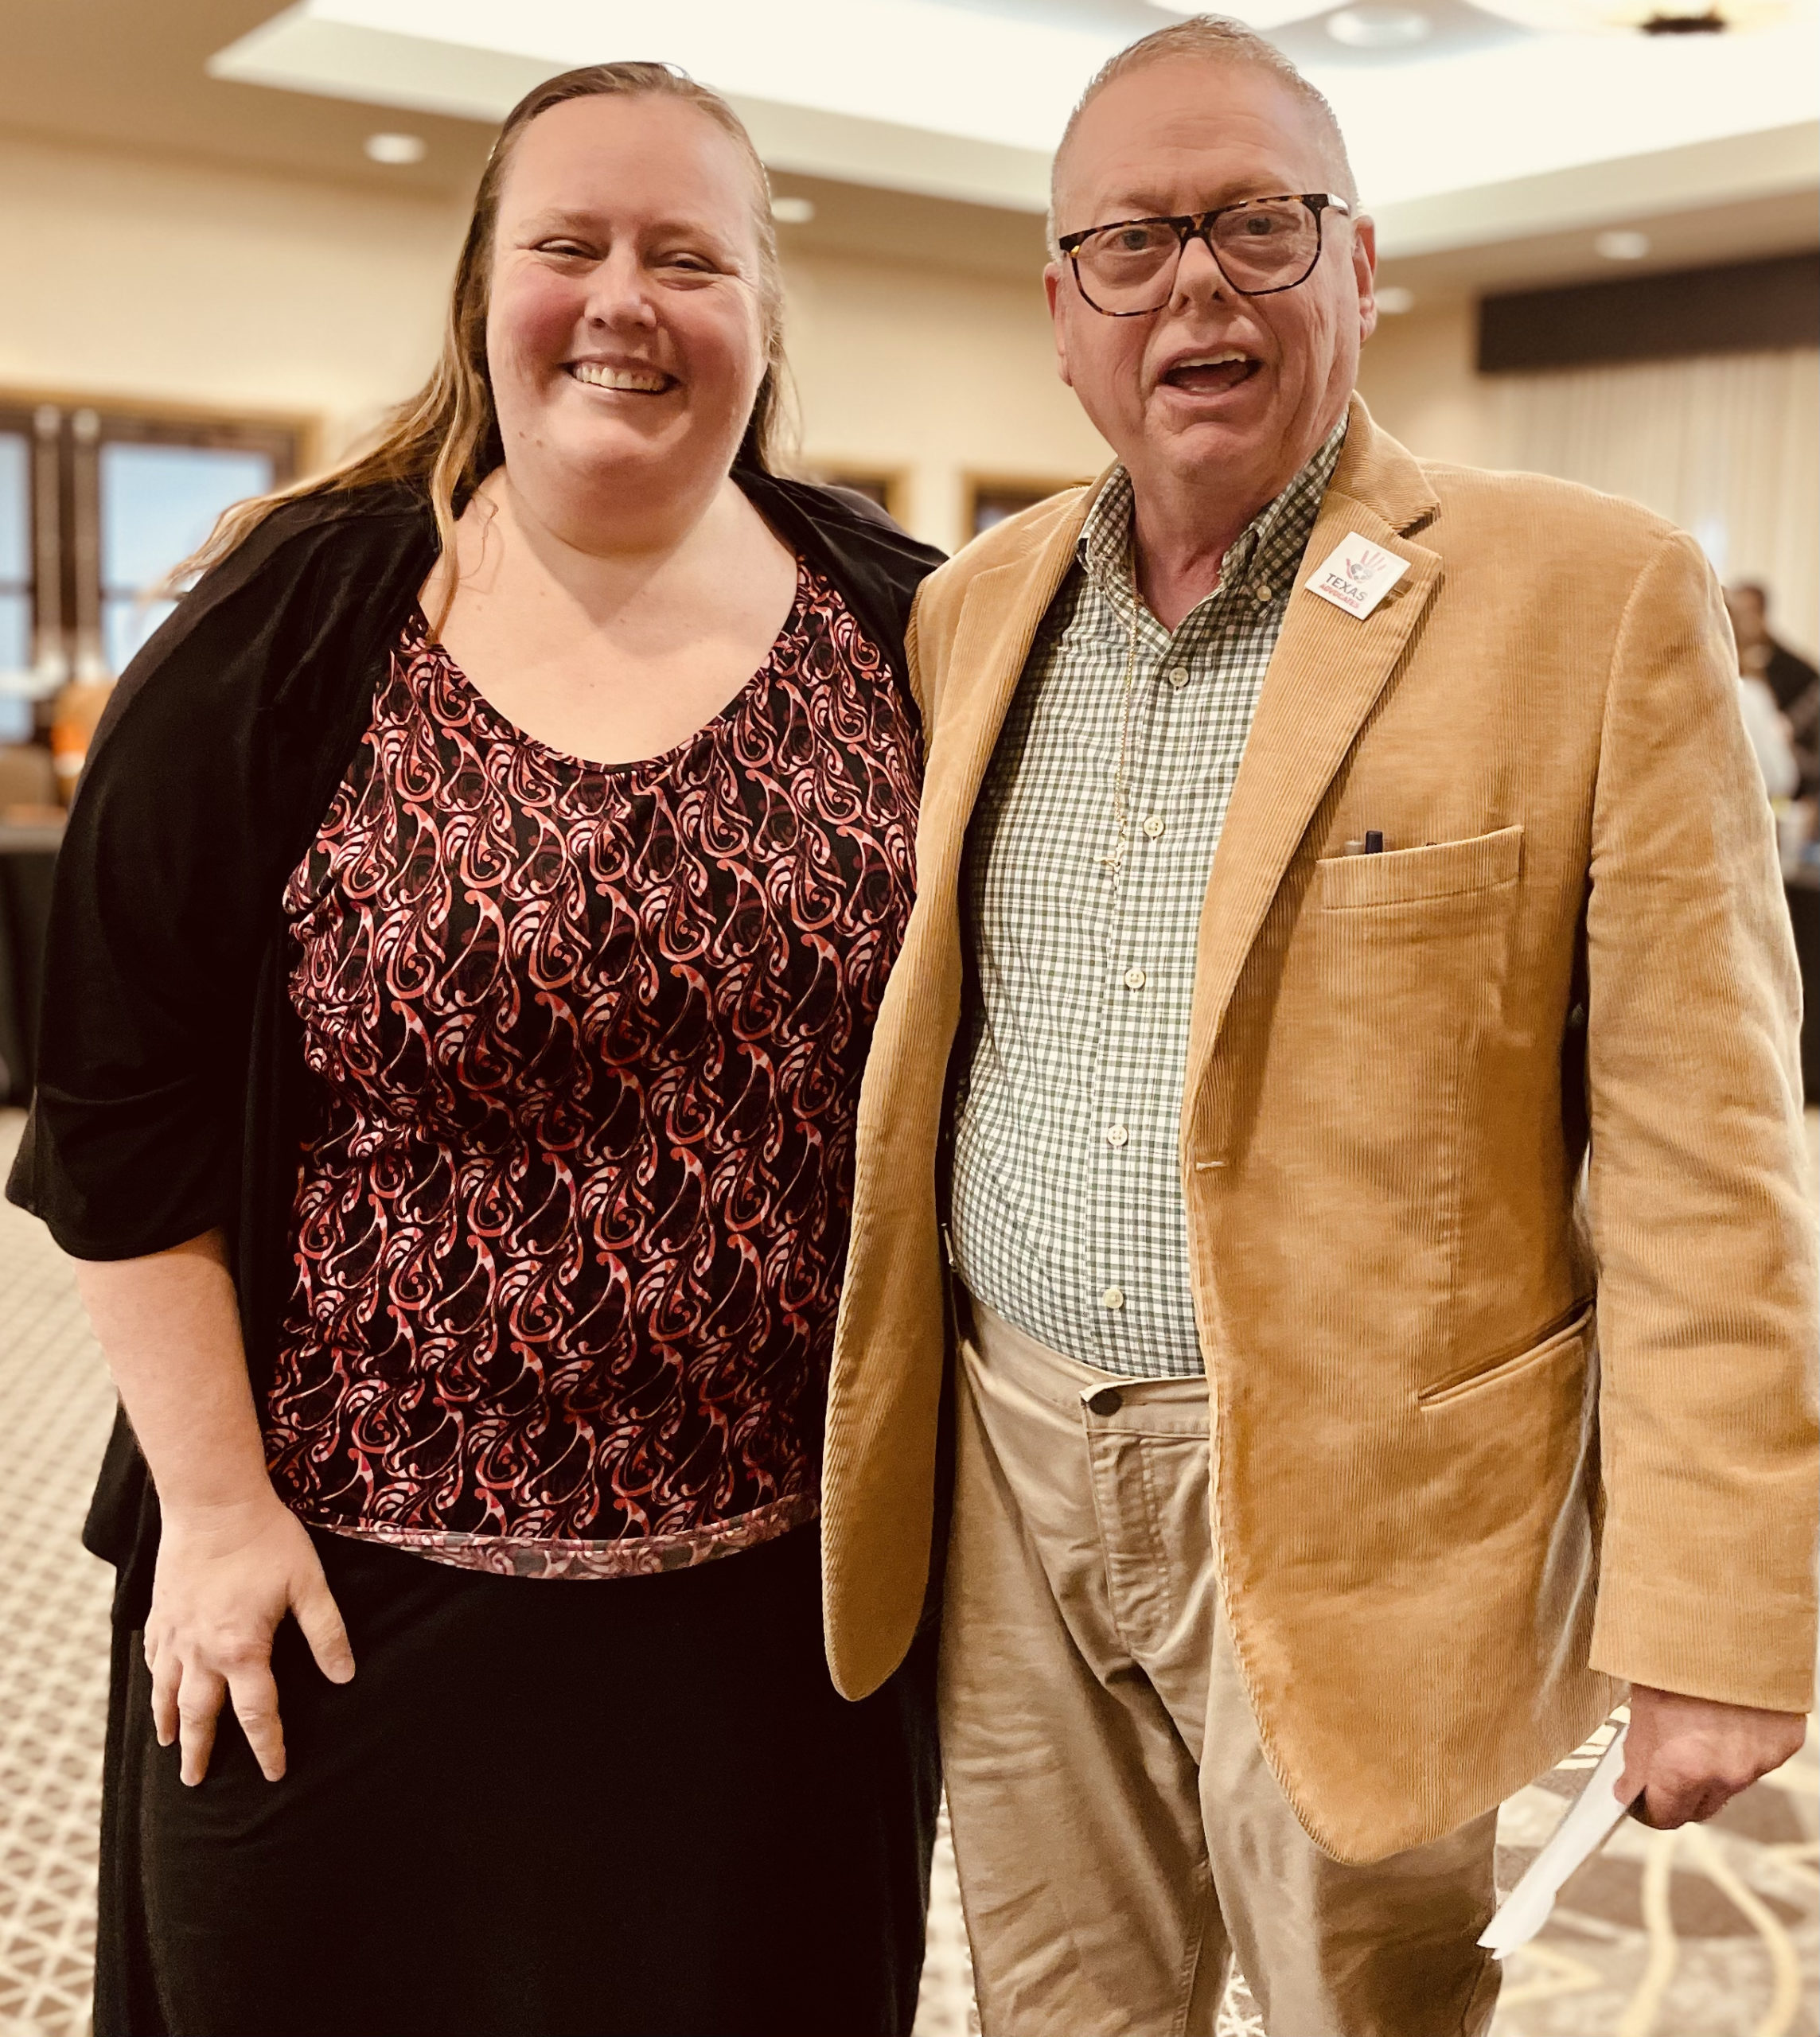 Texas Advocates' Co-director Brooke Hohfeld and Ronnie Browning, representing the Texas Council for Developmental Disability